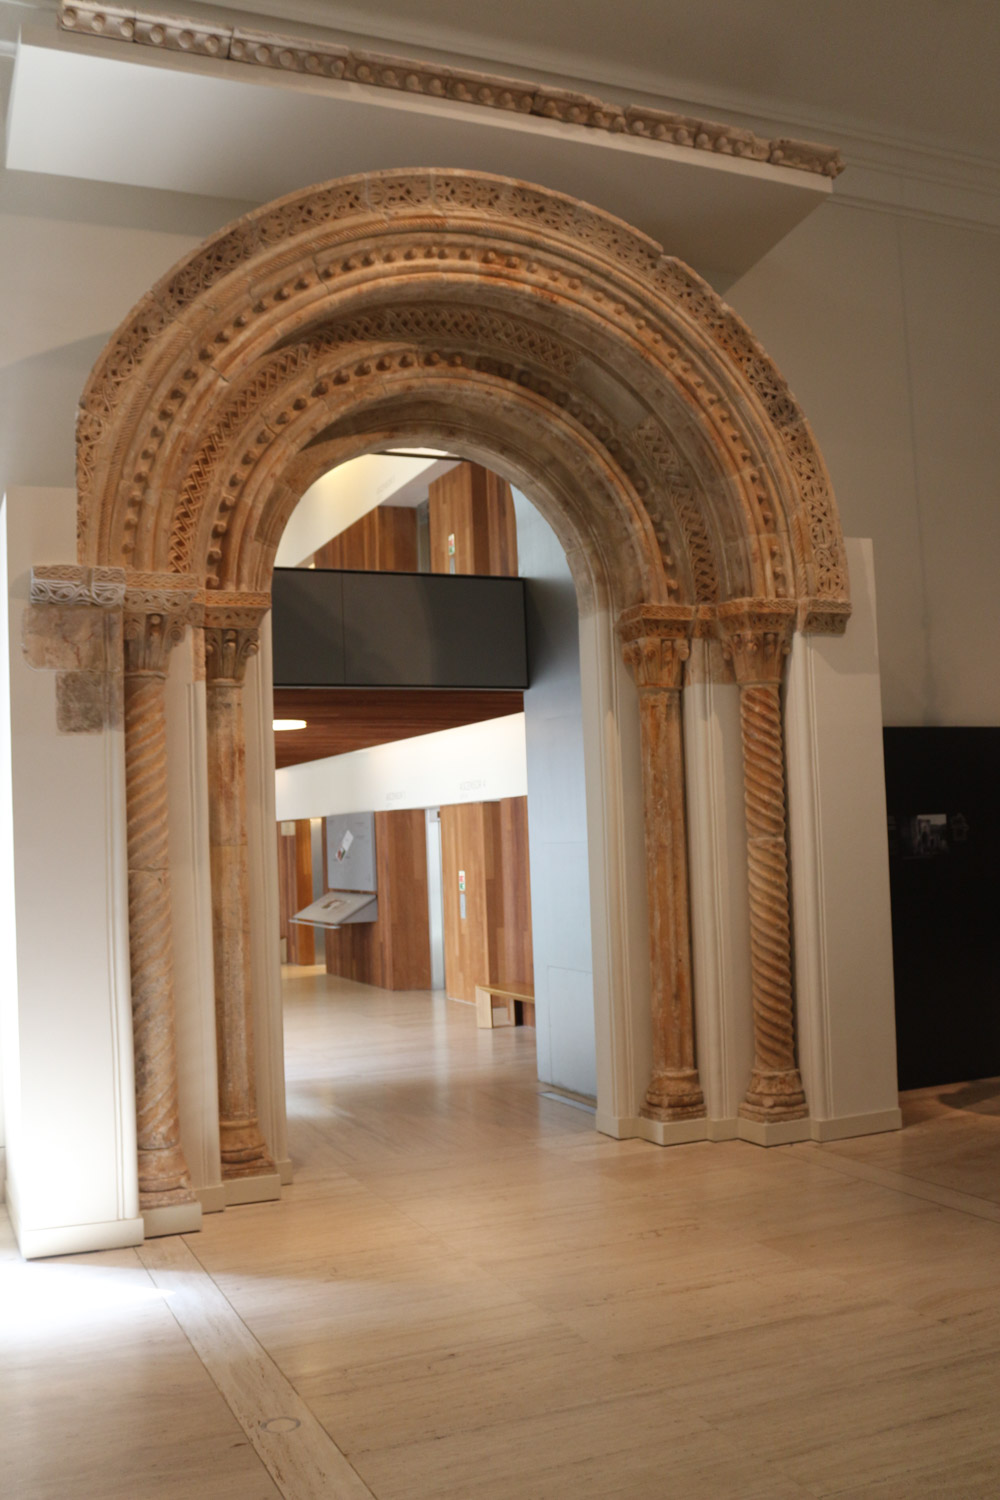 Exhibition& of the National Archaeological Museum of Spain